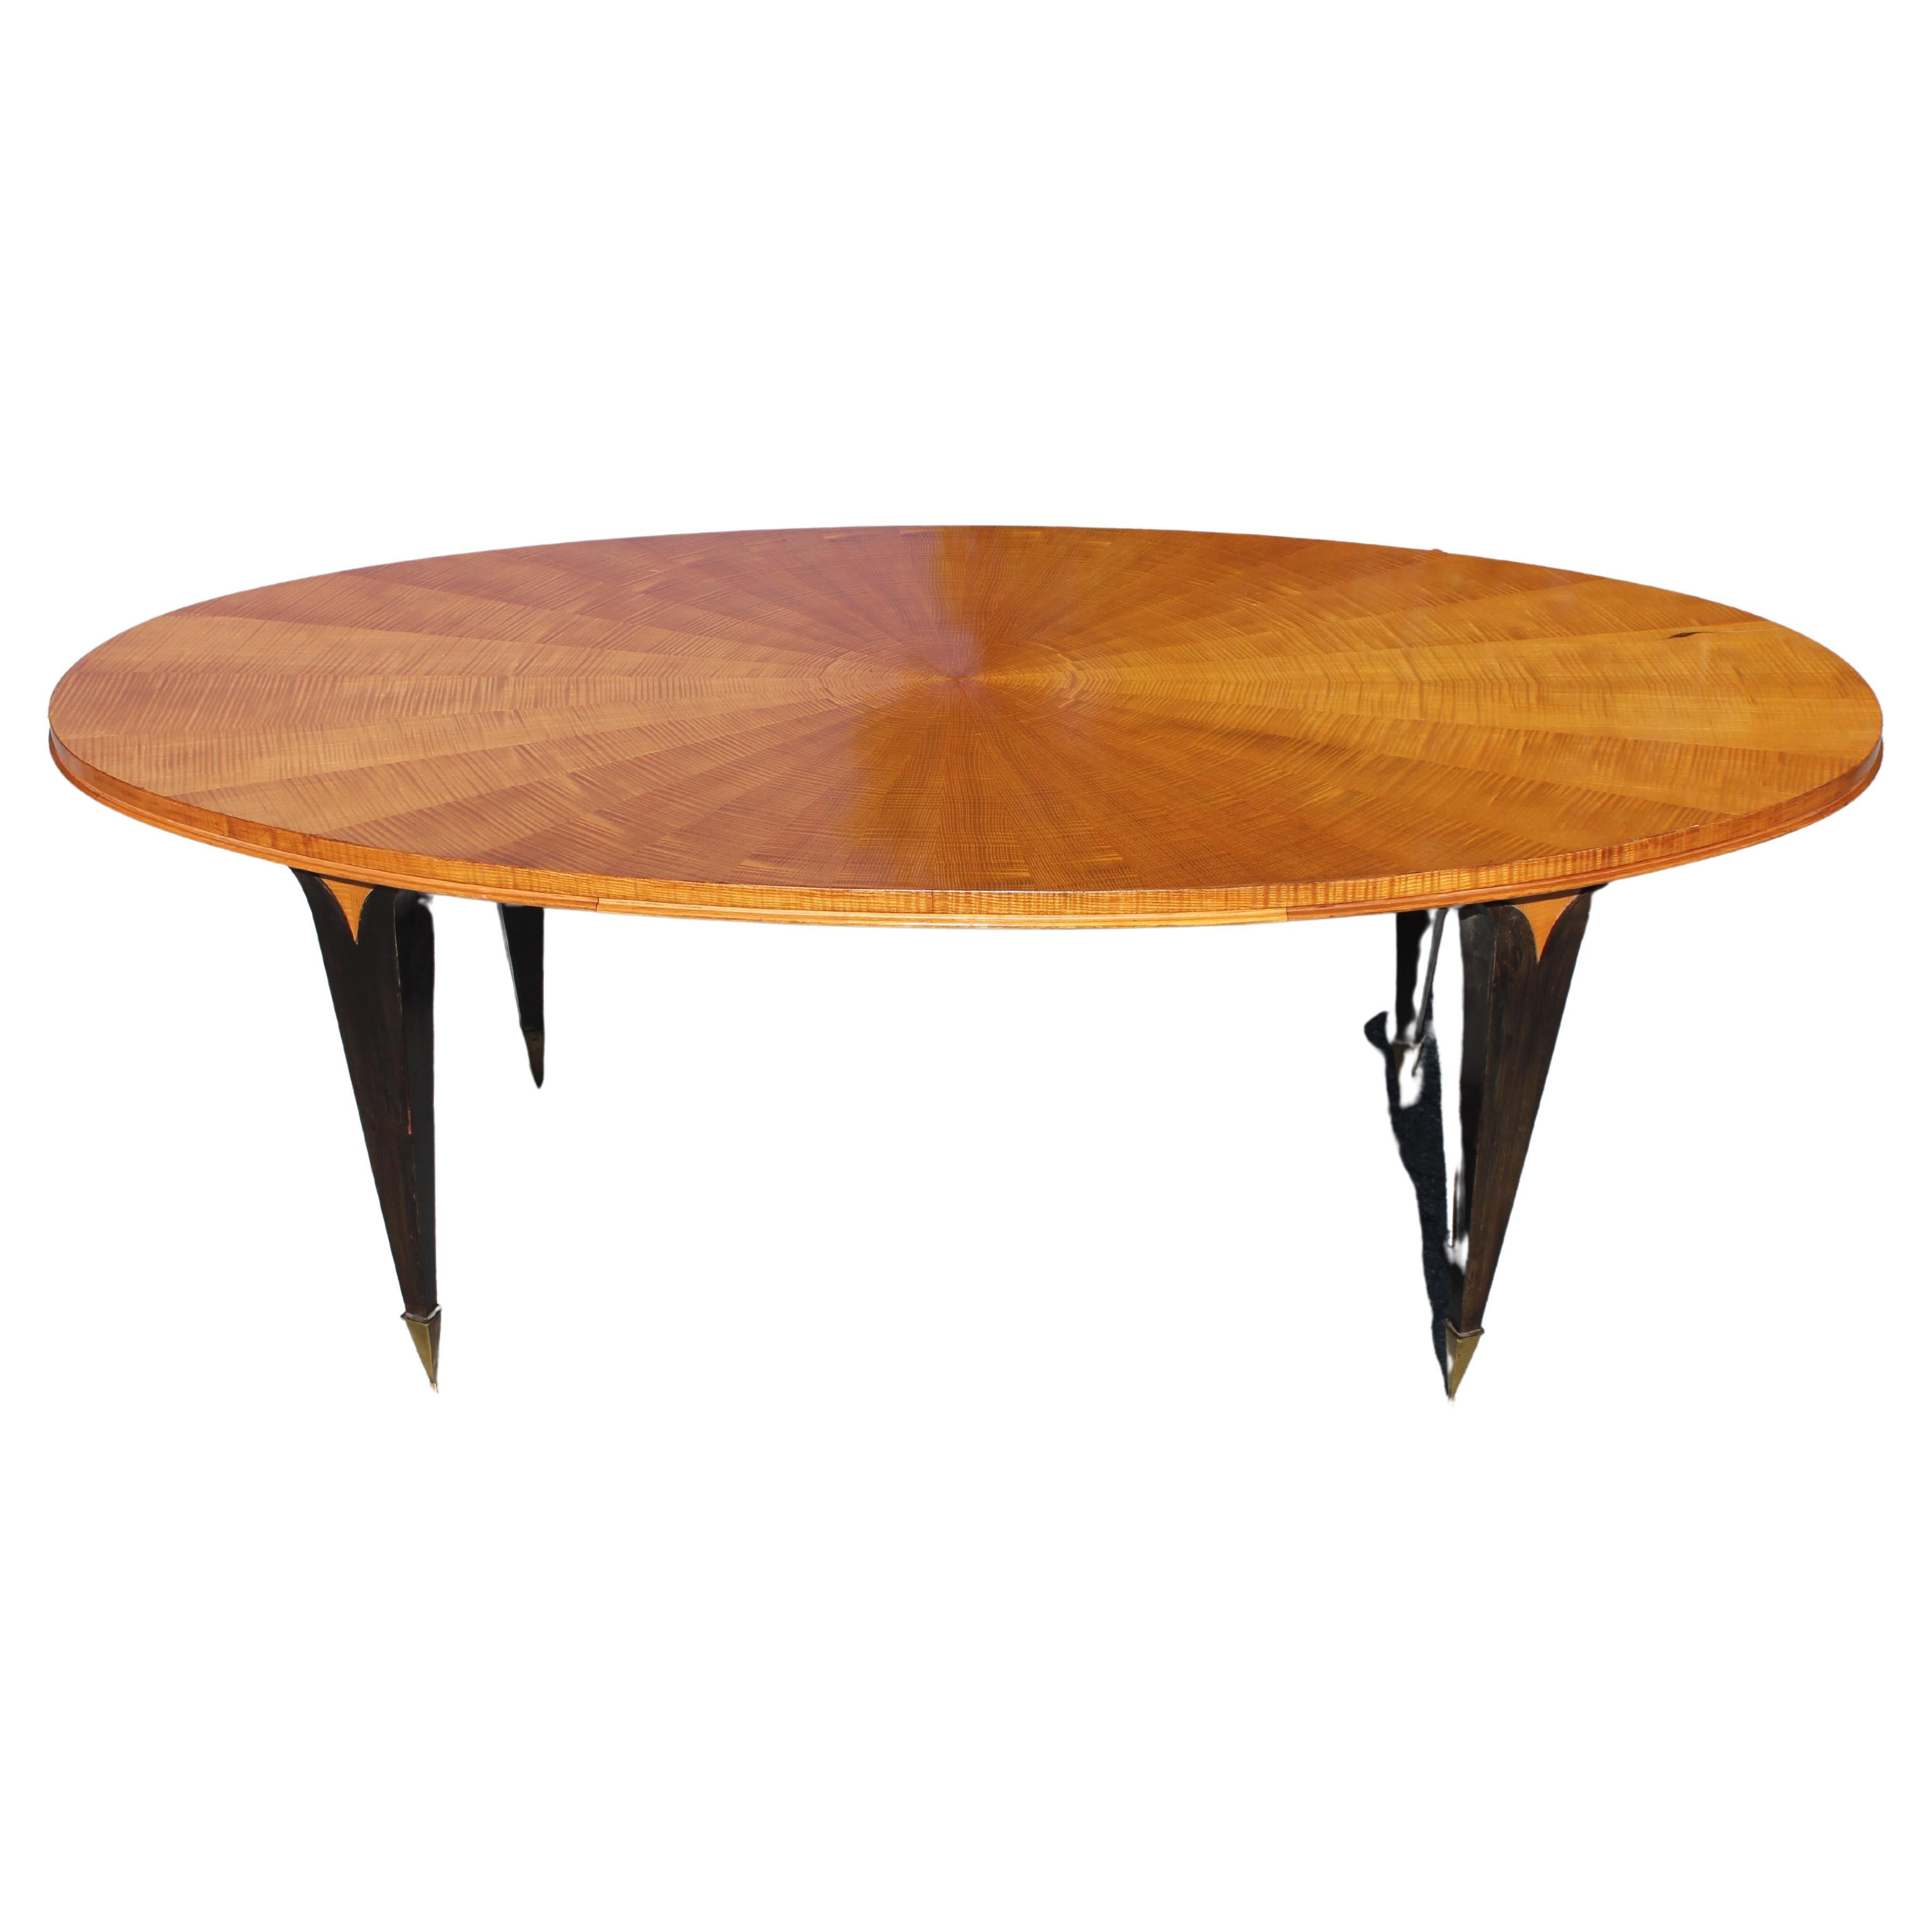 1940's French Art Deco Spectacular Sycamore Inlaid "Sunburst" Dining Table For Sale